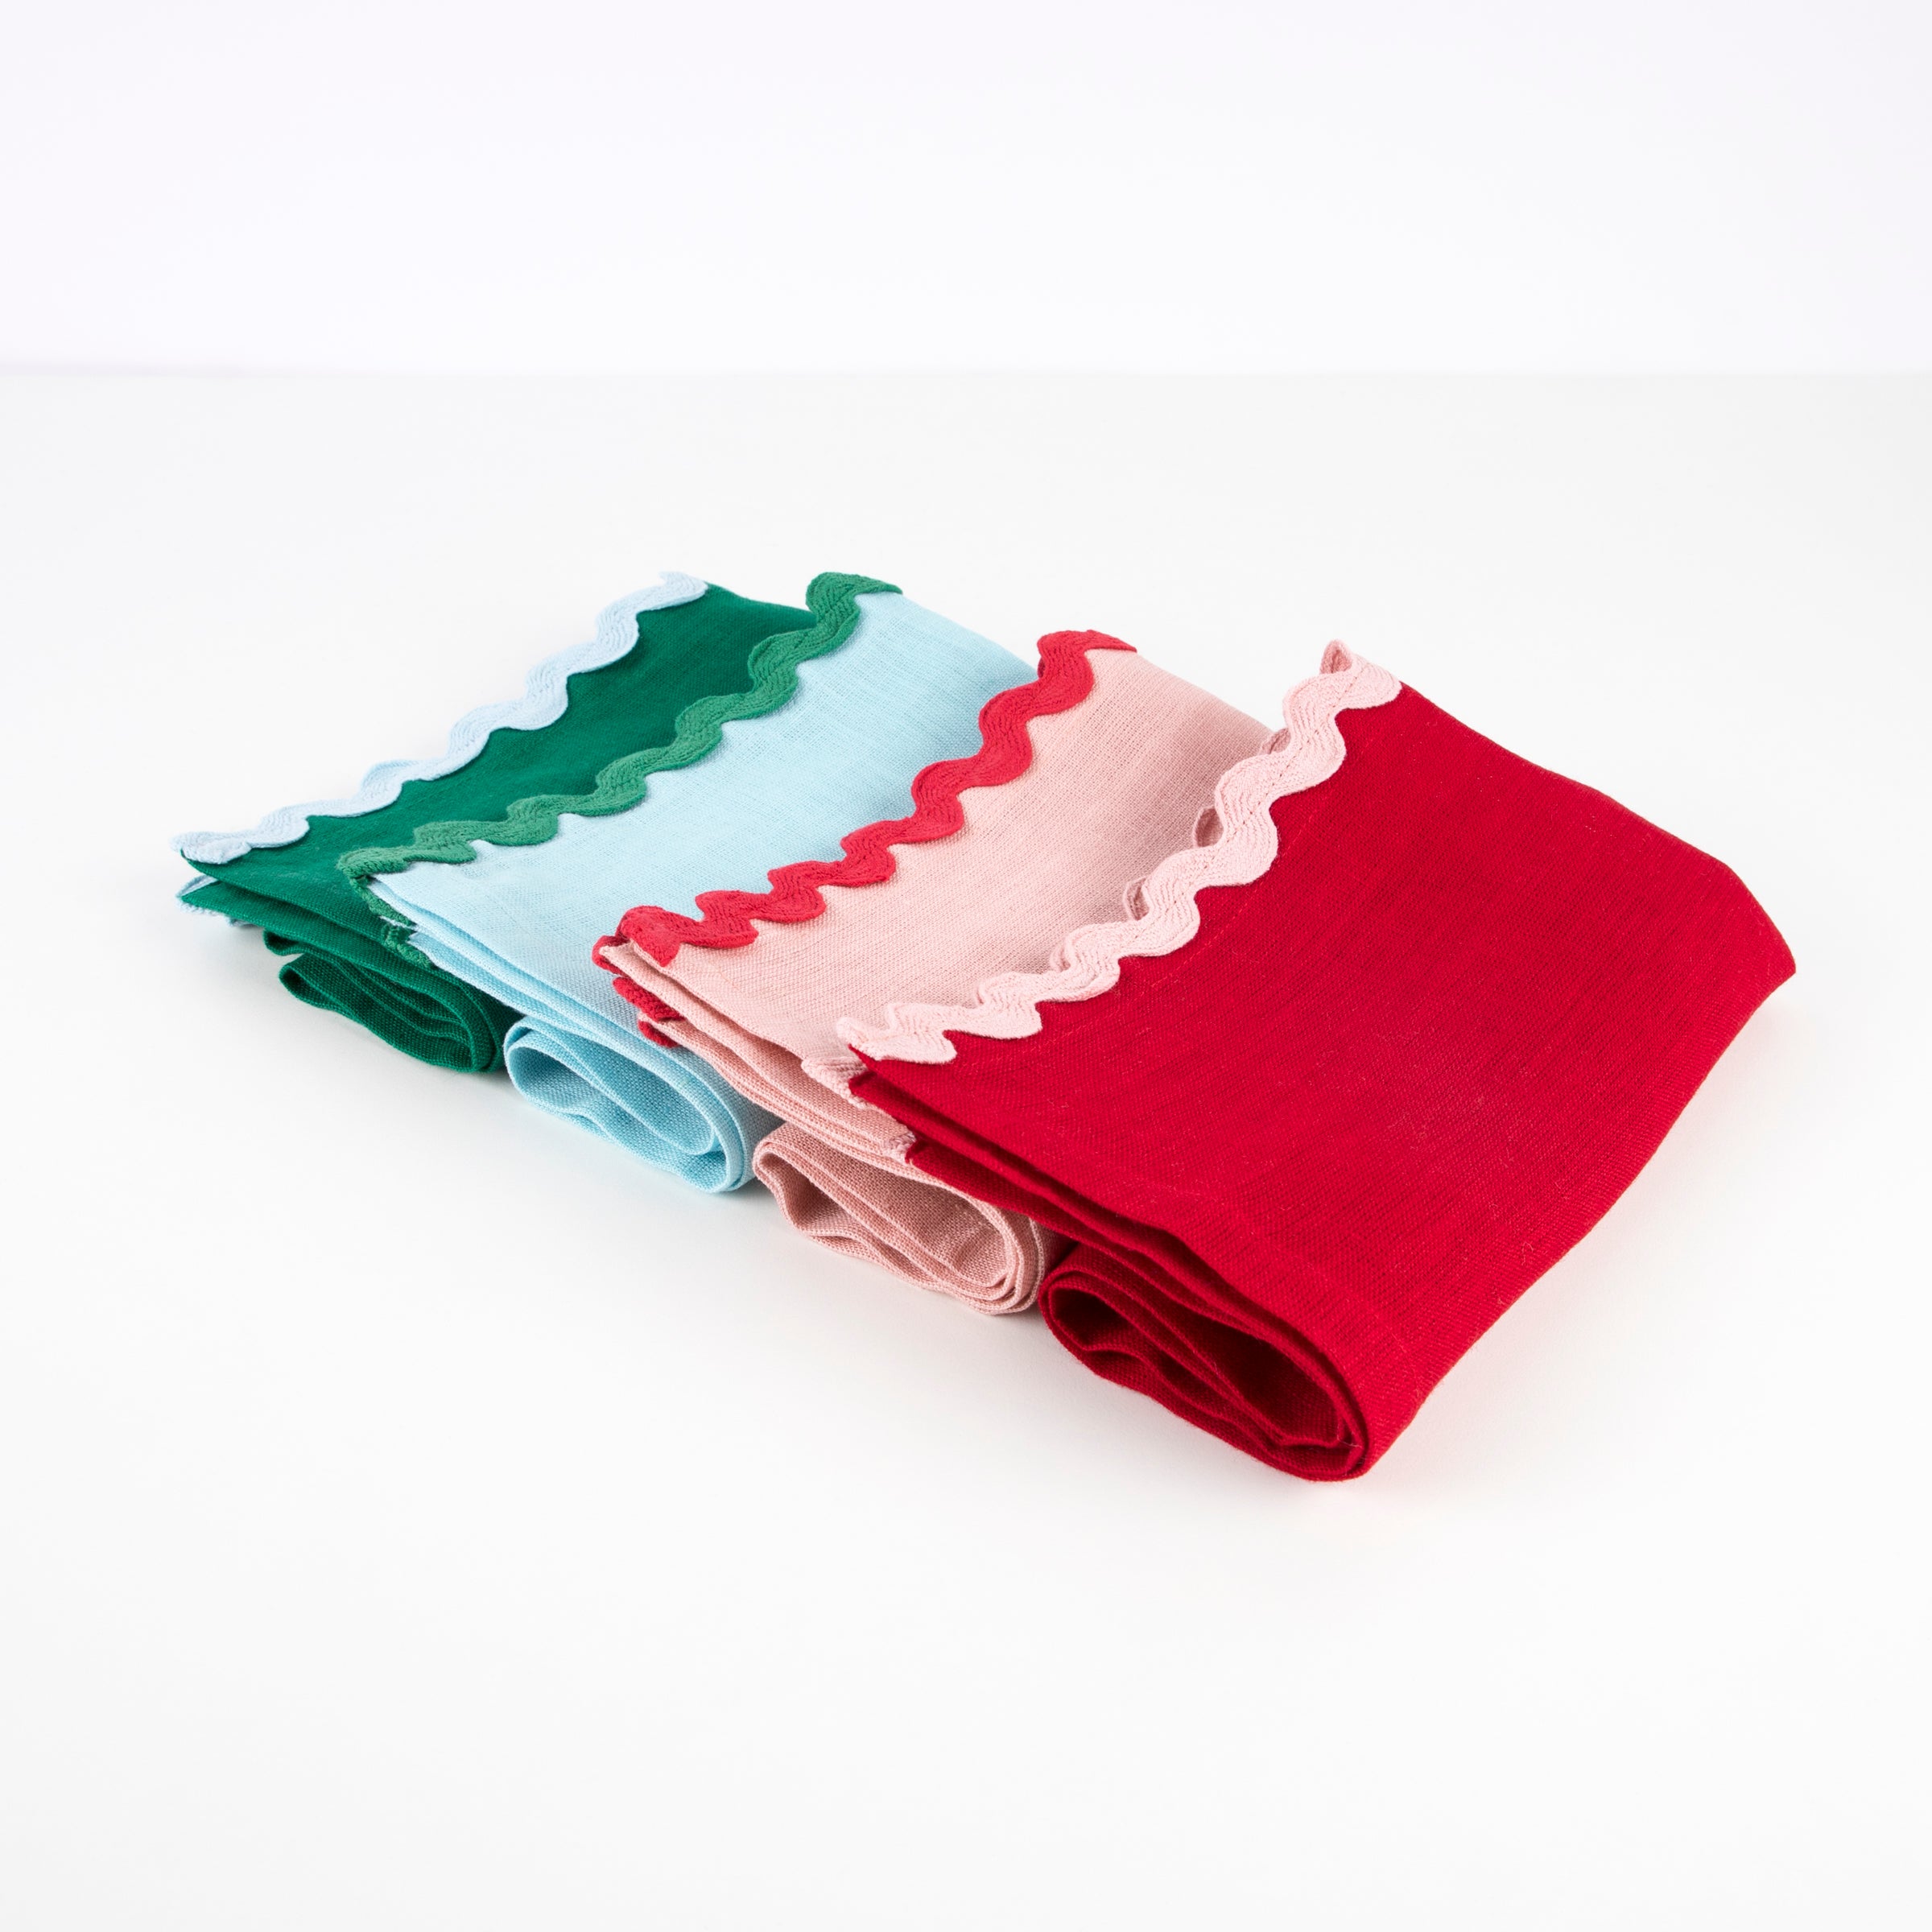 Our green, pink and red fabric napkins, with ric rac details, are perfect for Christmas tableware.